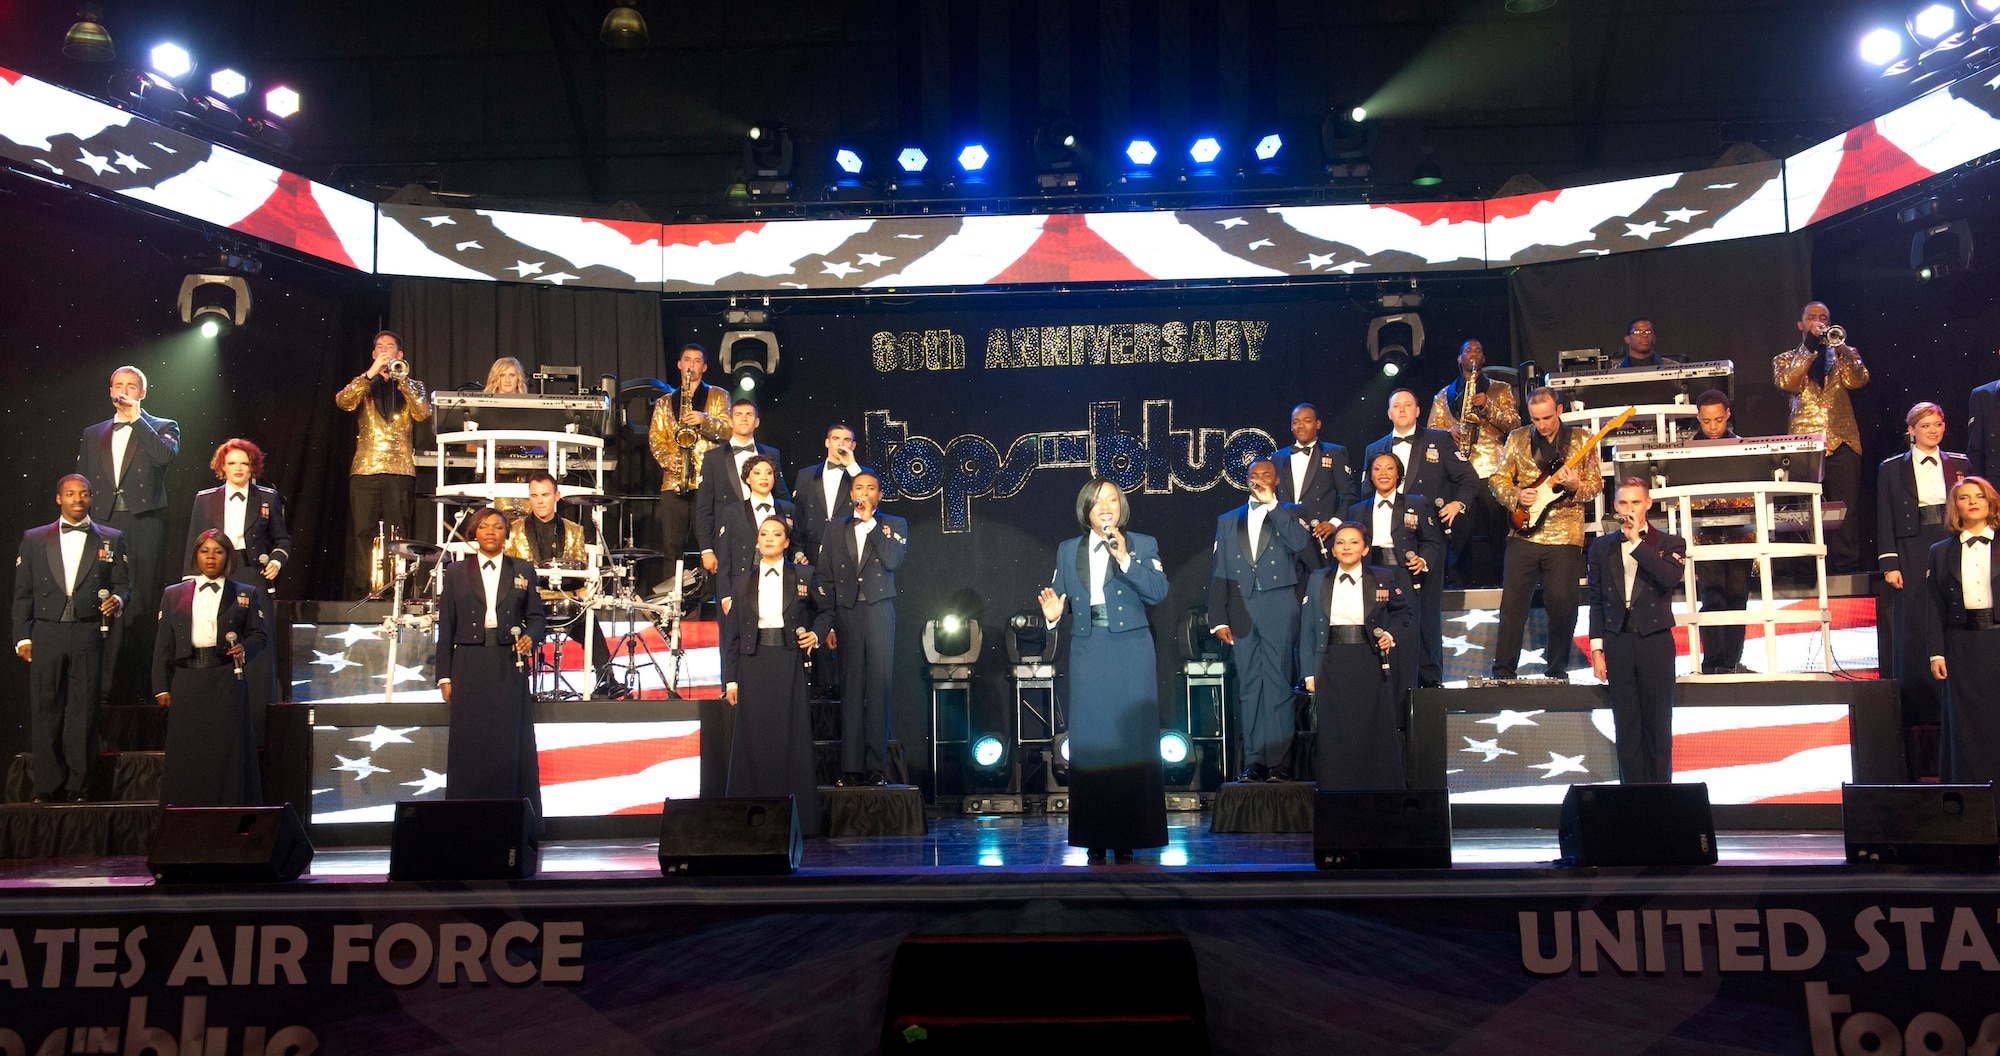 The entire U.S. Air Force Tops in Blue team sing during a performance Aug. 19, 2014, at the Wings Over the Rockies Air and Space Museum in Denver. Tops in Blue is the Air Force’s premier entertainment showcase that tours around the world, performing in 20 countries and more than 70 locations in the United States each year. (U.S. Air Force photo by Airman 1st Class Samantha Saulsbury/Released)